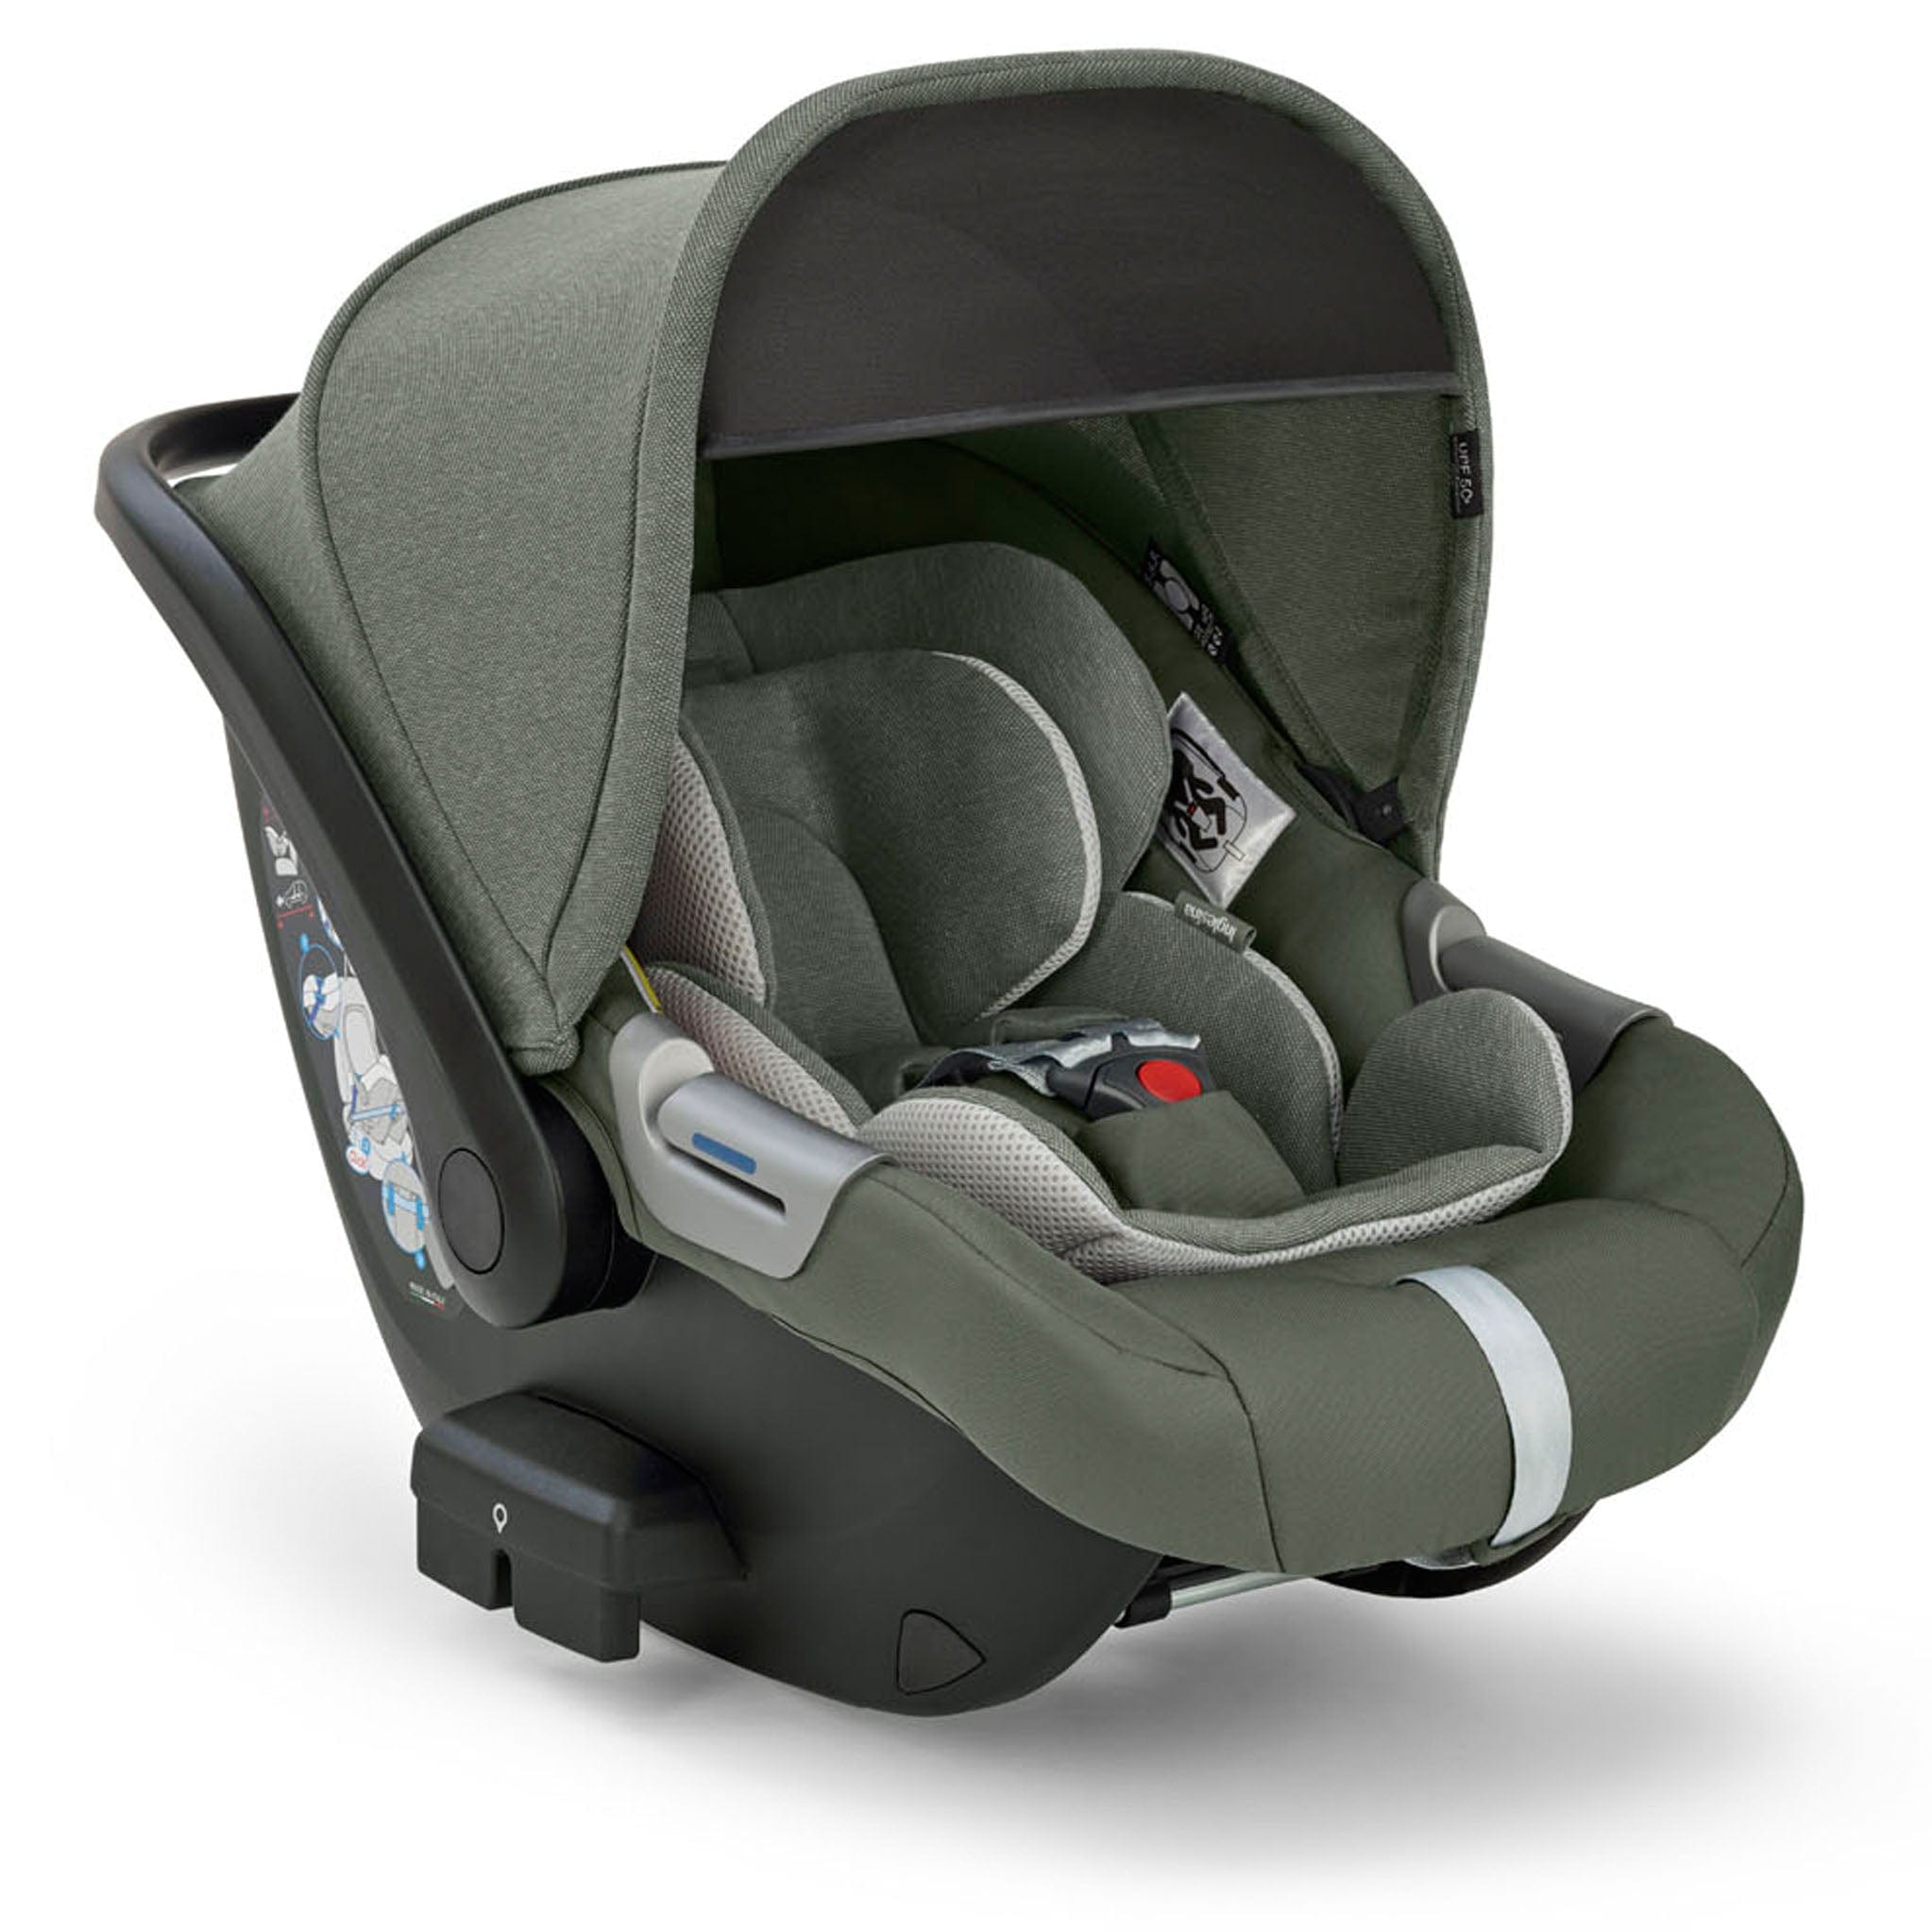 Inglesina travel systems Inglesina Electa System Quattro in Tribeca Green with Darwin car seat and i-Size base ELC-TRI-GRE